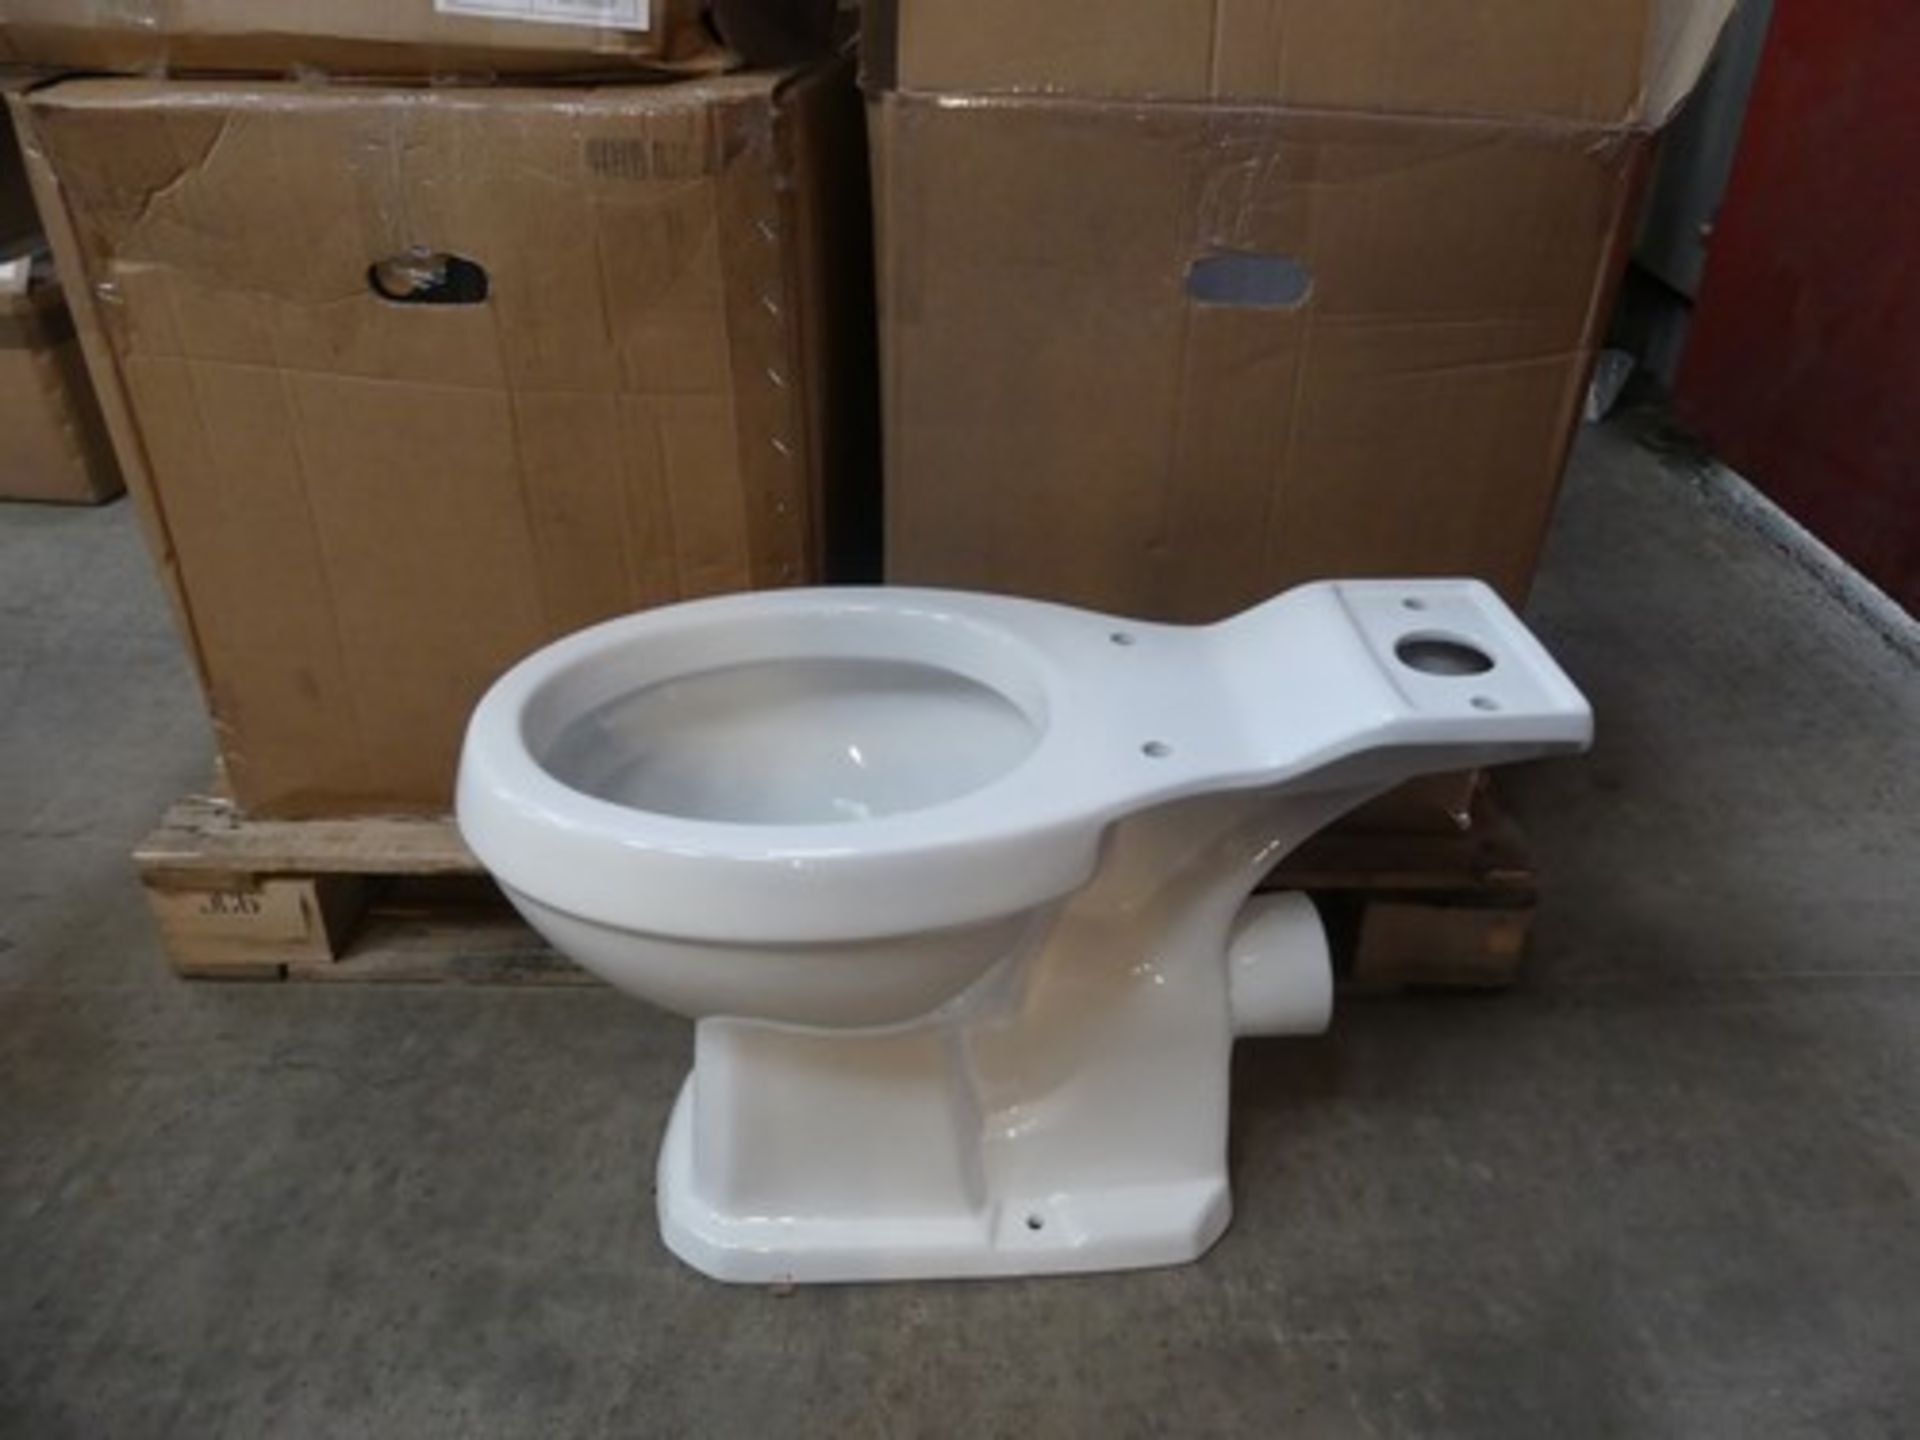 3 x unbranded floor standing toilets - new (TS)